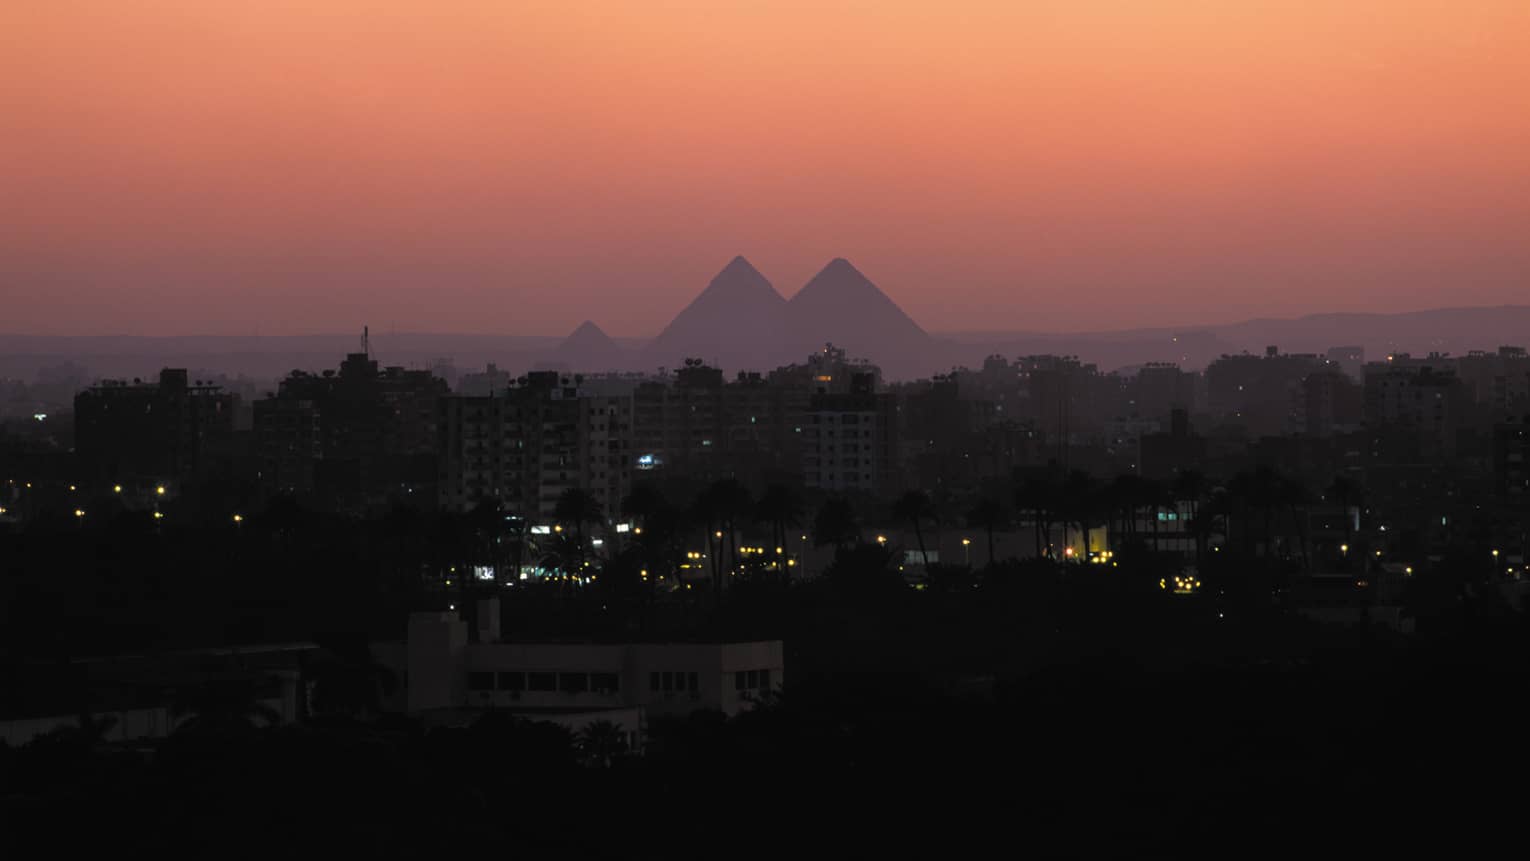 Silhouettes of the Great Pyramids of Giza against a pink sunset